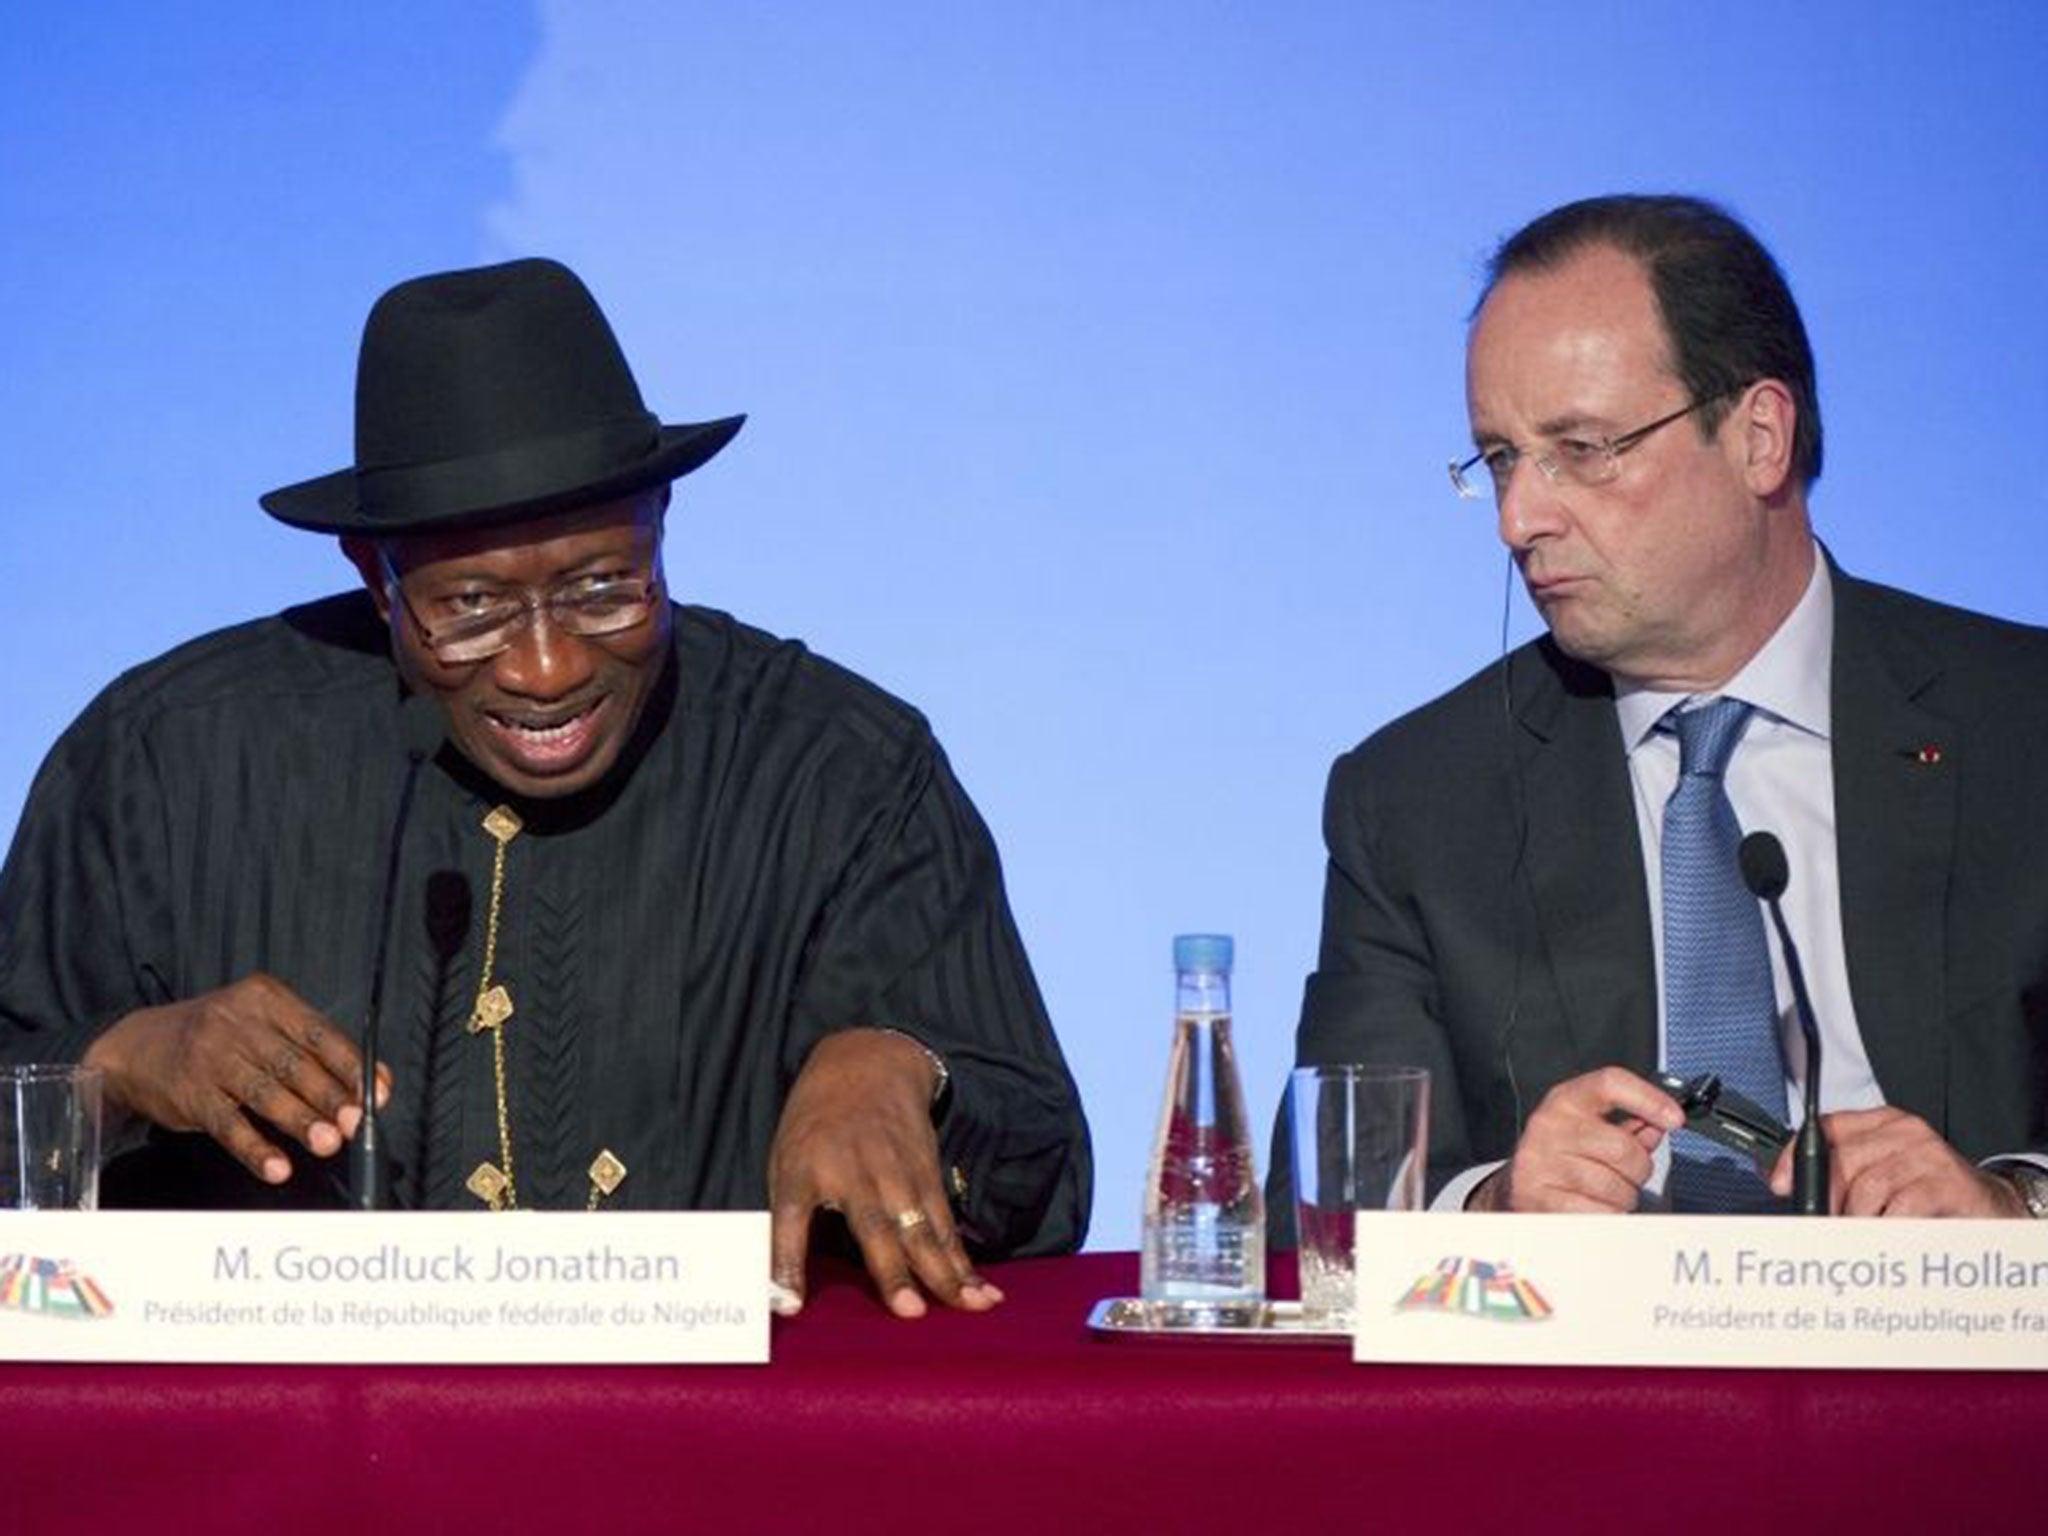 Nigeria's president, Goodluck Jonathan, with Fran?ois Hollande at the Paris summit